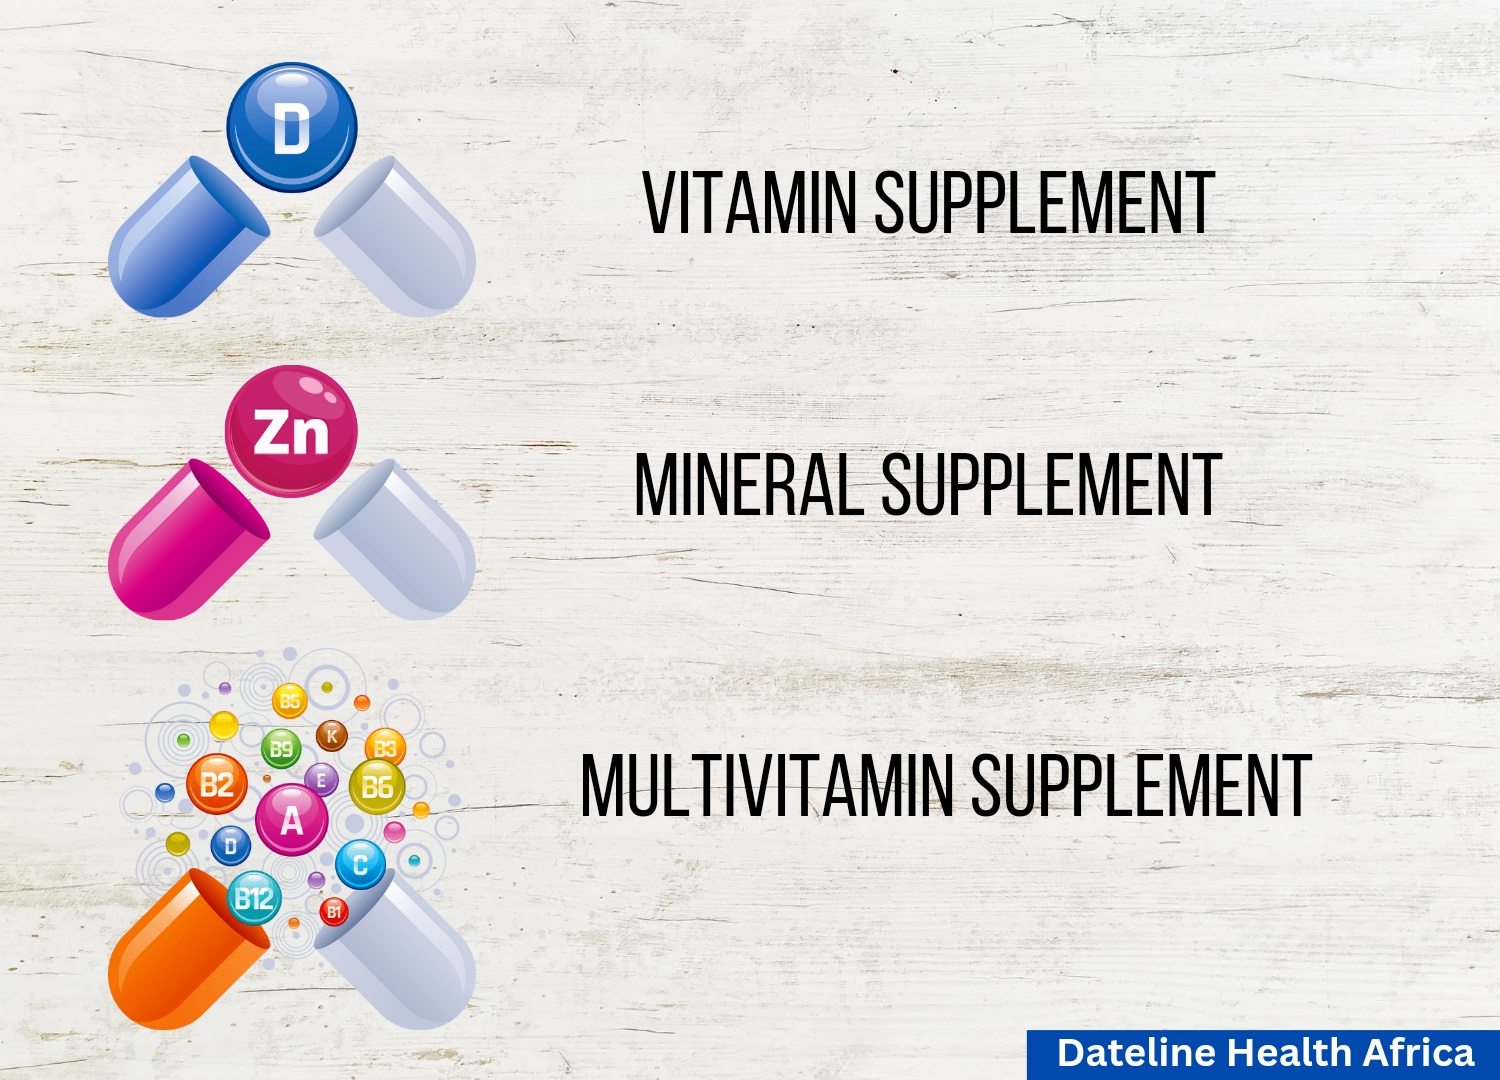 Image explaining the differences in the composition of supplements.